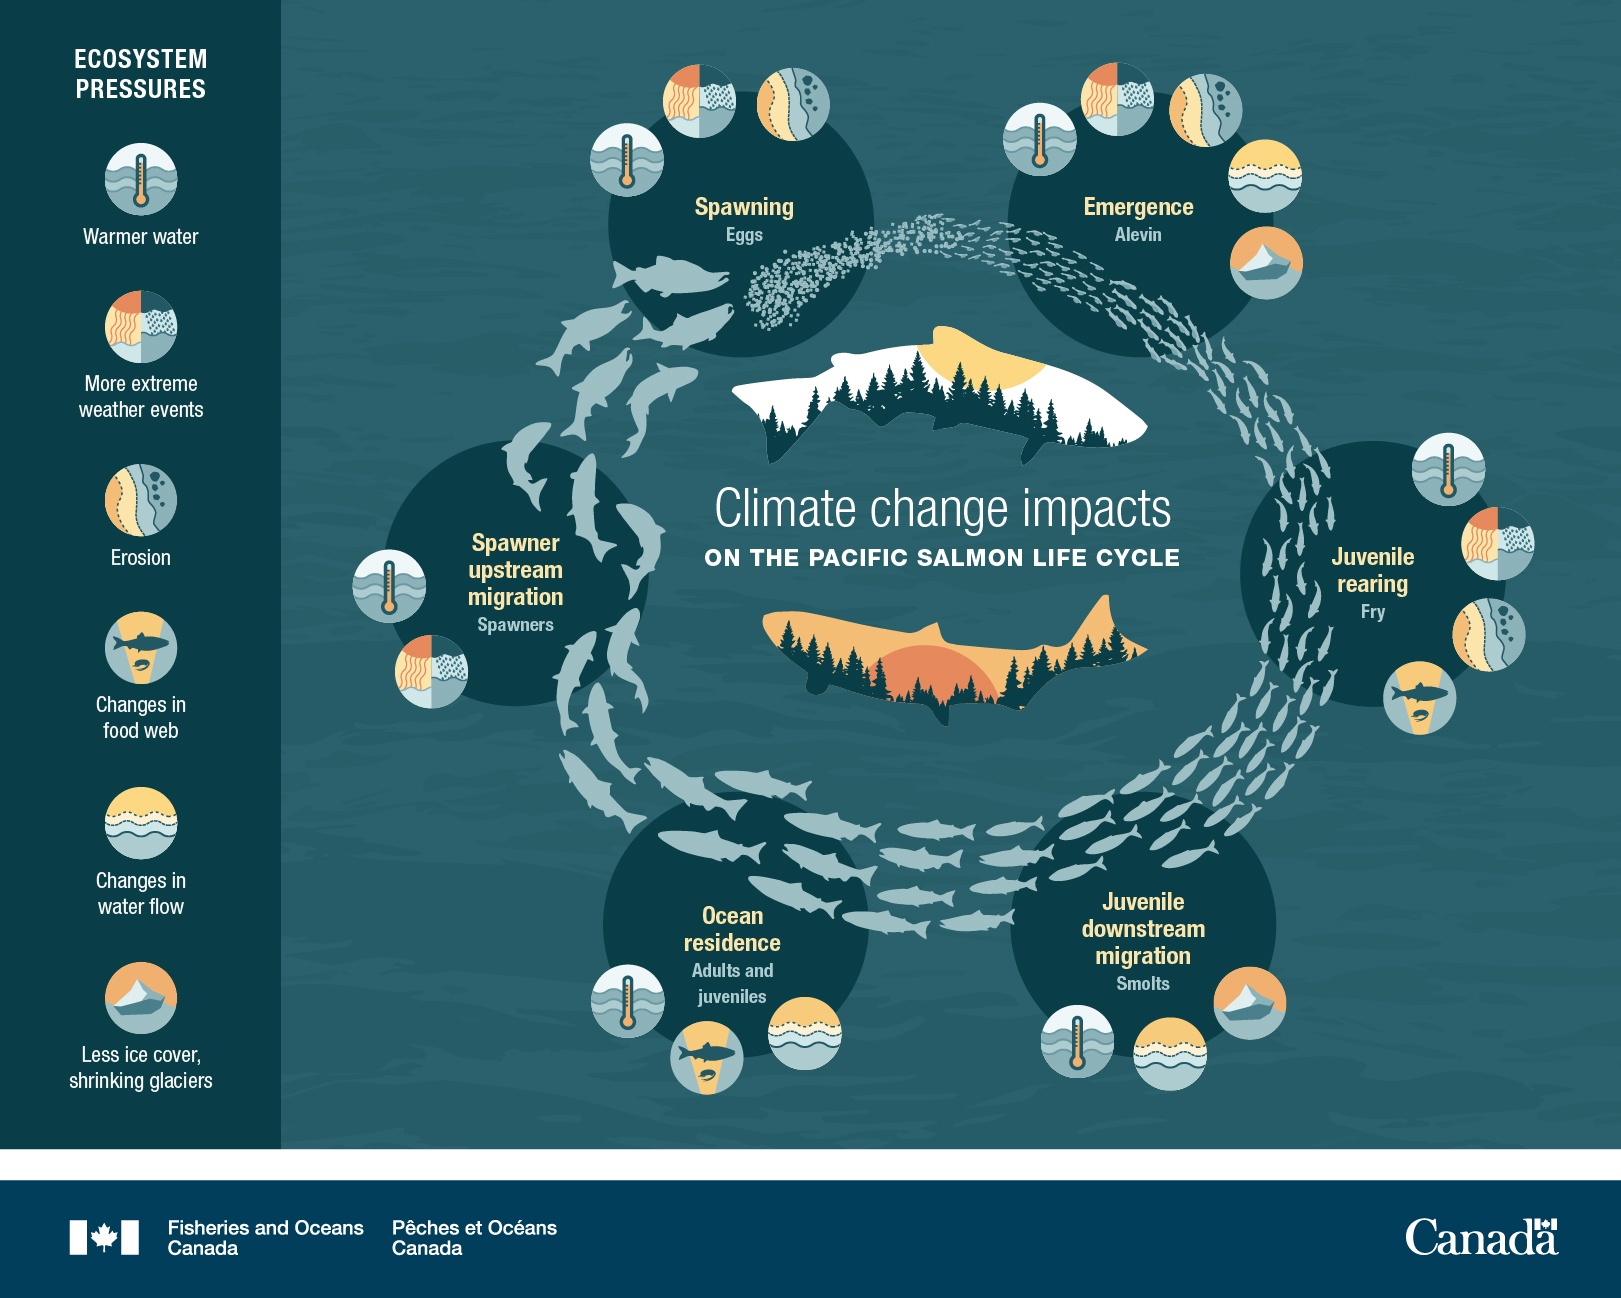 Climate change impacts on the Pacific salmon life cycle